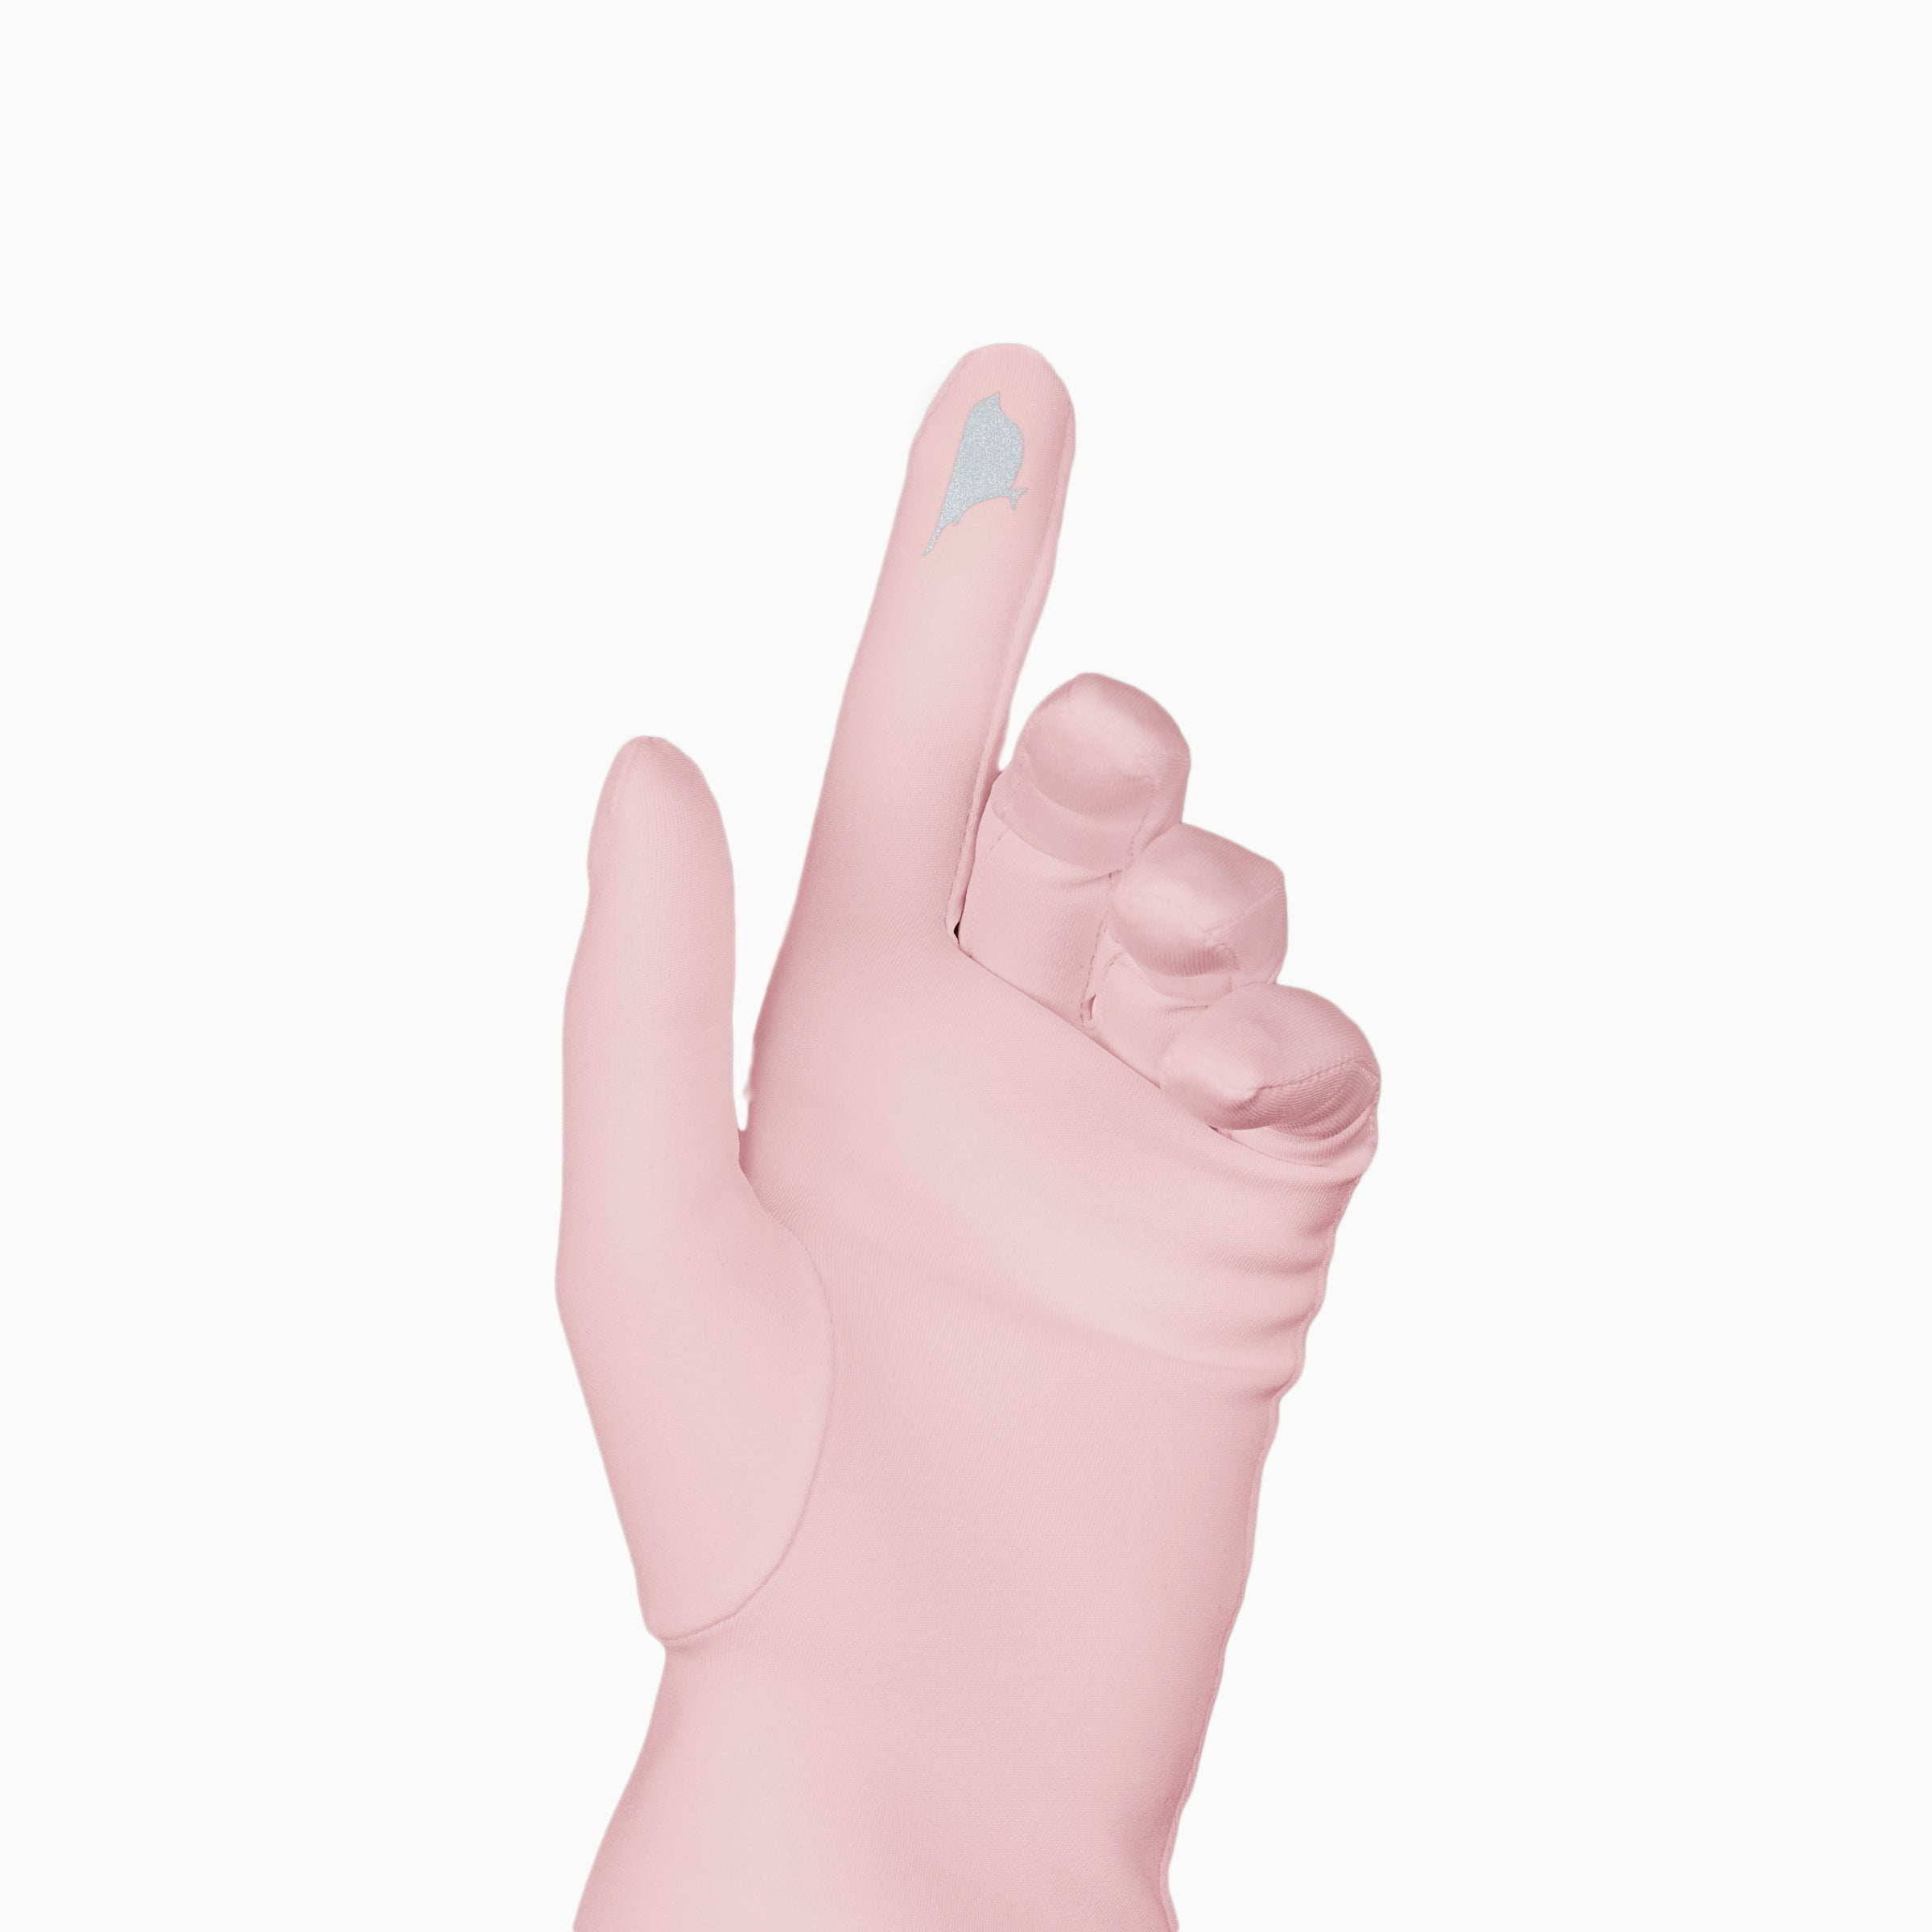 Pink women's glove against white background showing technology friendly index finger.